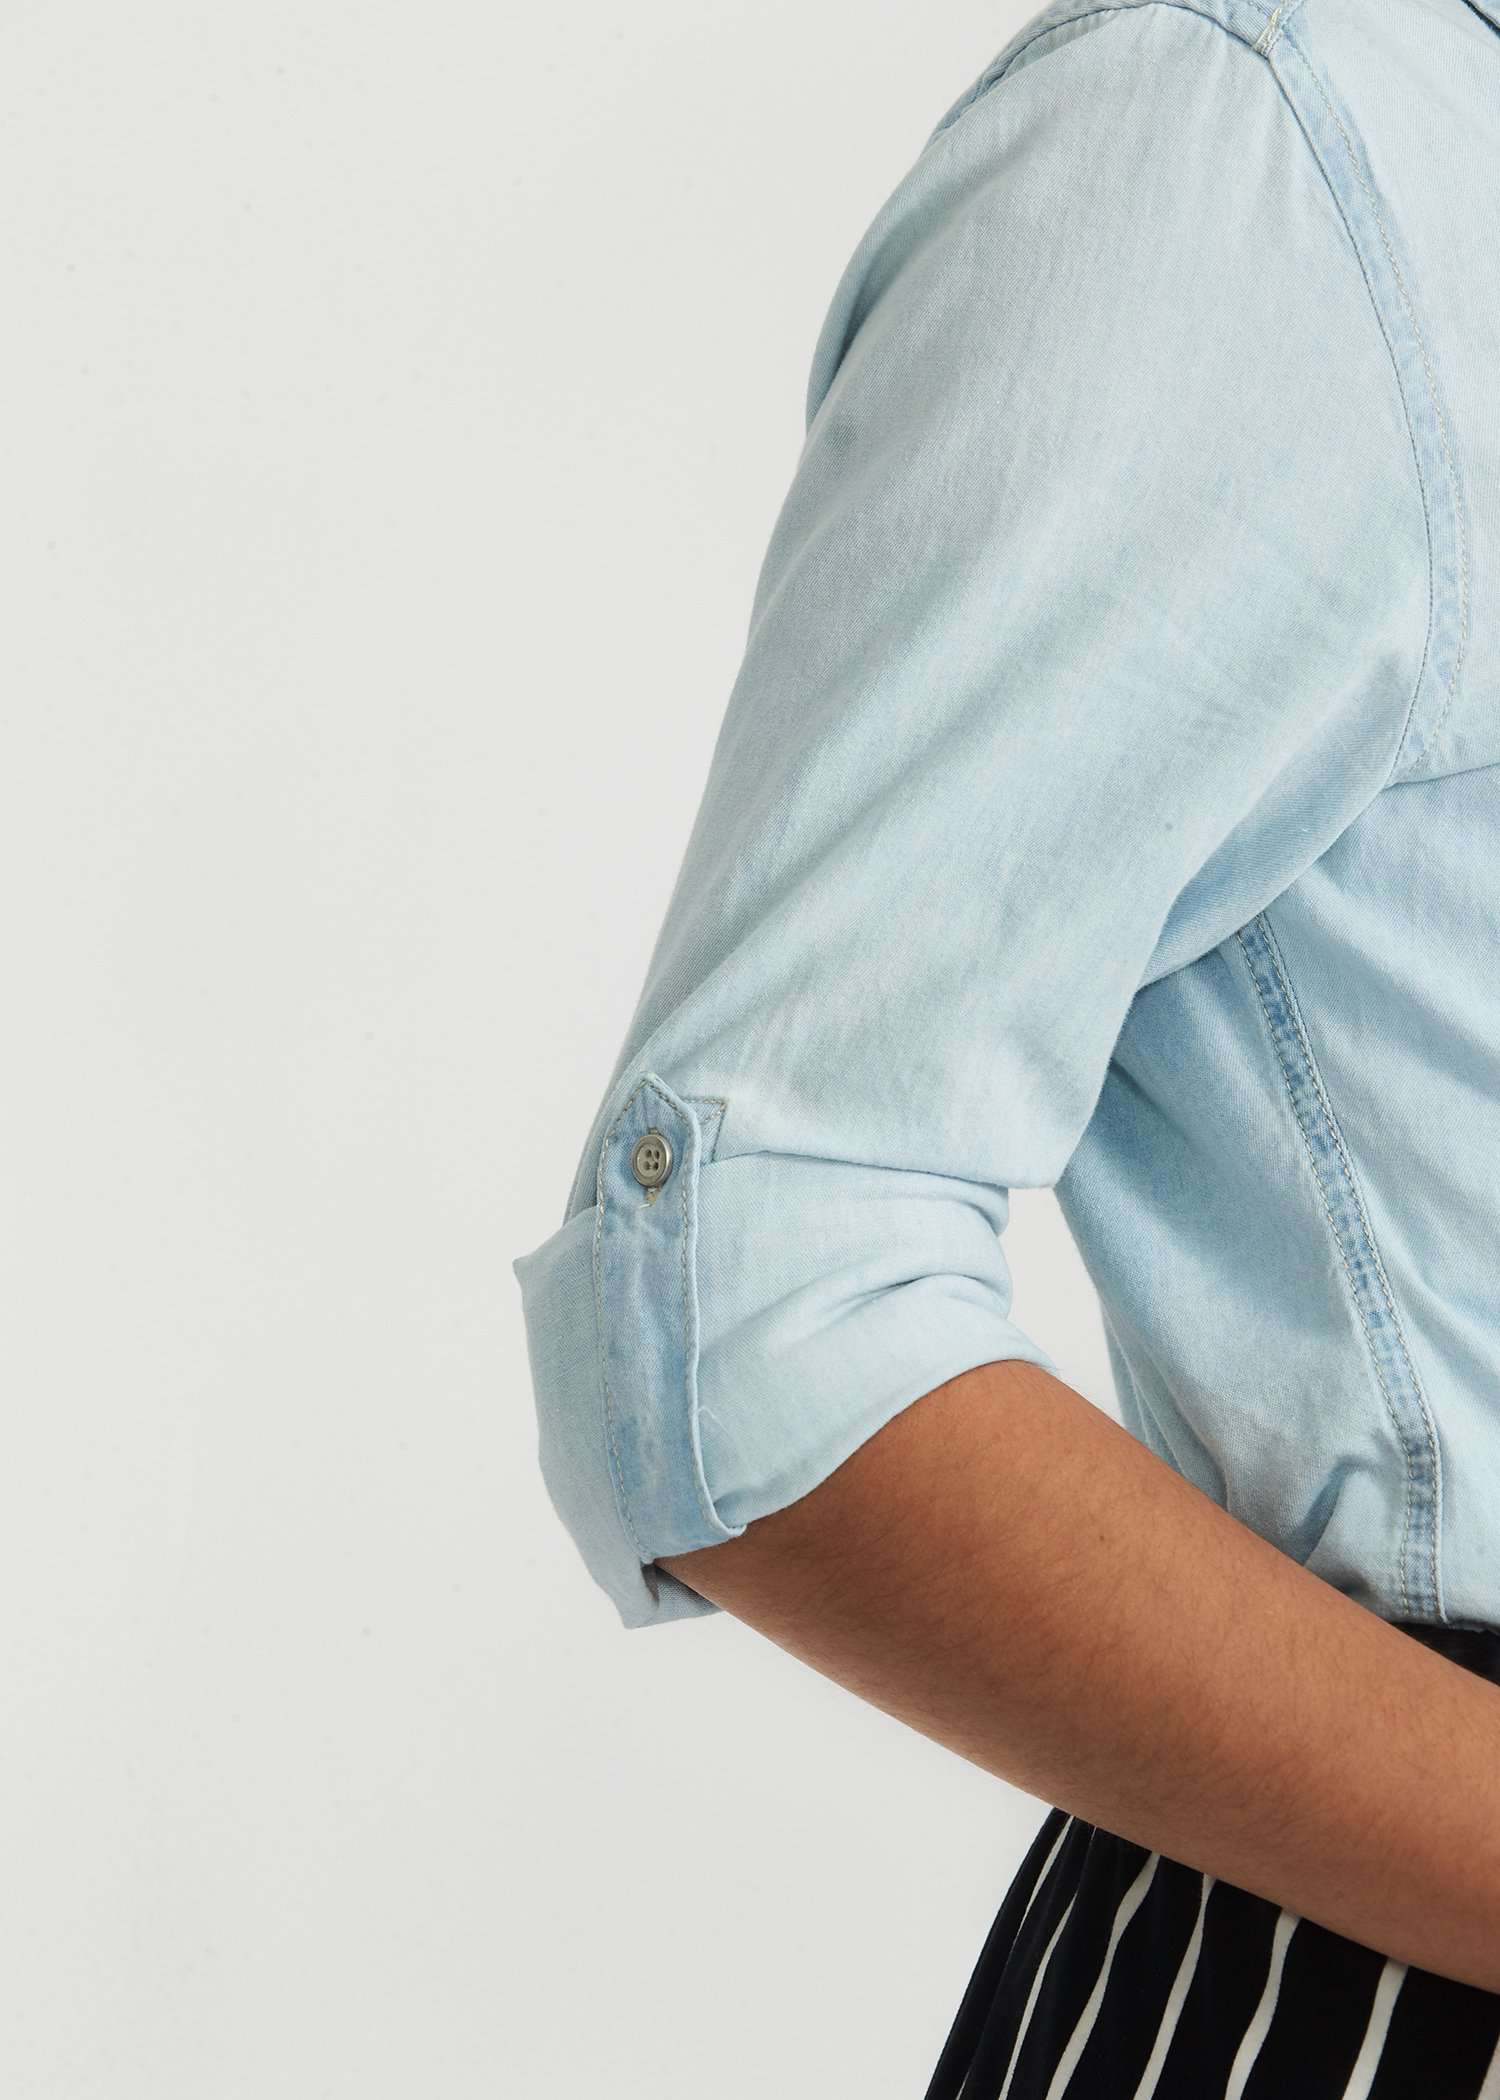 Light colored denim button down shirt, three quarter length sleeve with two front pockets and collar.